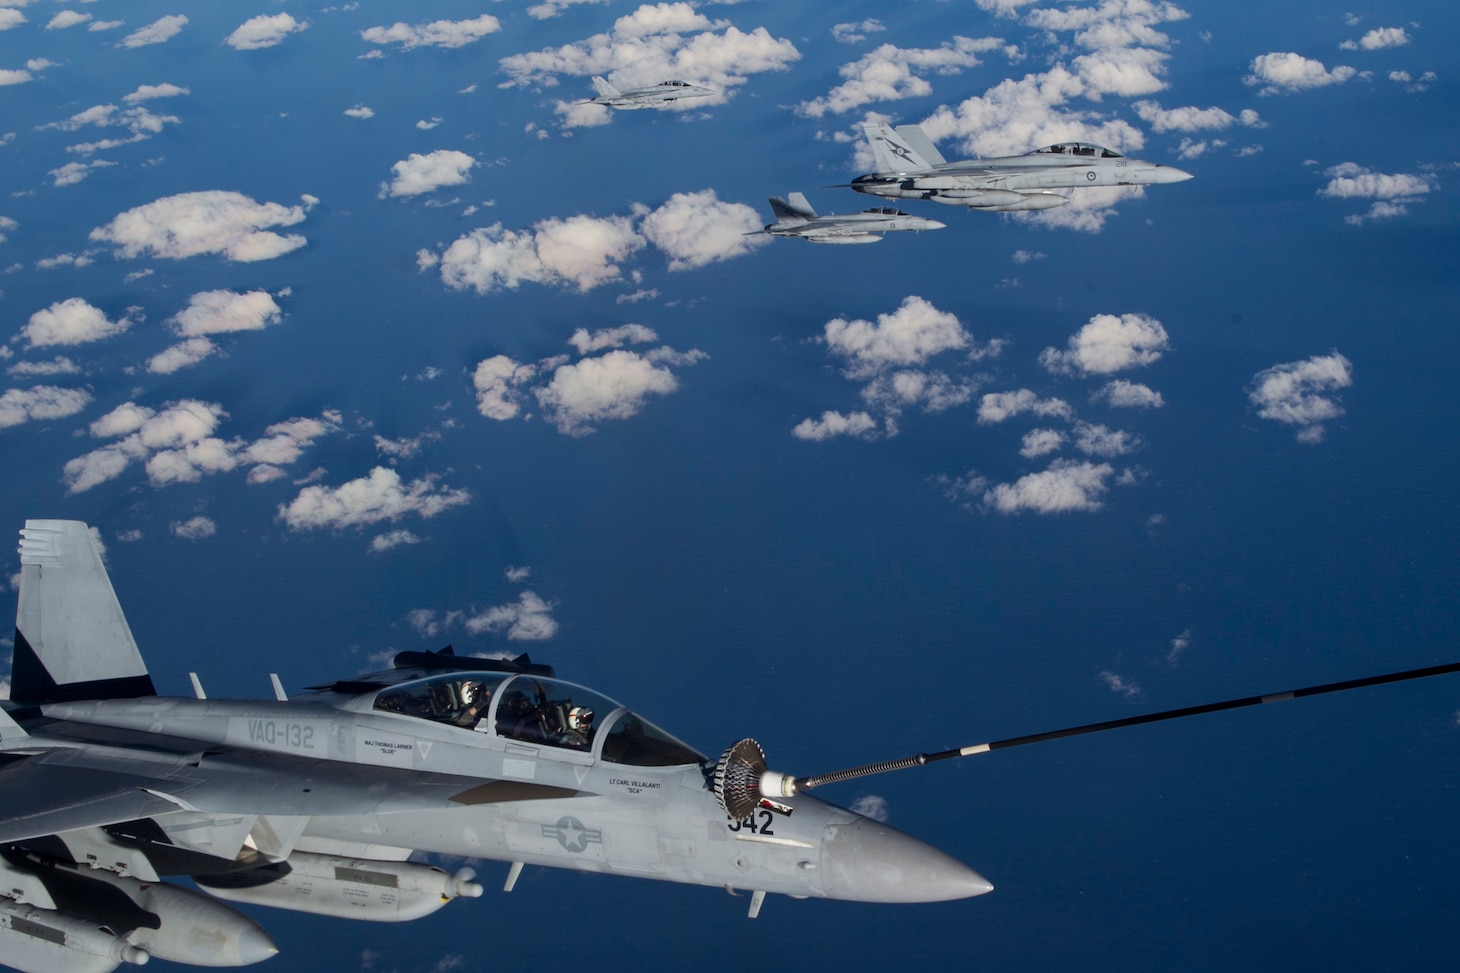 United States Navy EA-18G Growlers from VAQ-132 "Scorpion" Squadron conducts Air to Air refuelling operations with an RAAF KC-30 Multi Role Tanker Transport aircraft from No 33 Squadron. Waiting for their turn are RAAF F/A-18F Super Hornets from No 1 Squadron. RAAF Base Amberley is the main operating base for RAAF and United States aircraft activities during Talisman Saber 2017.(Royal Australian Air Force photo by Sgt. Peter Borys)